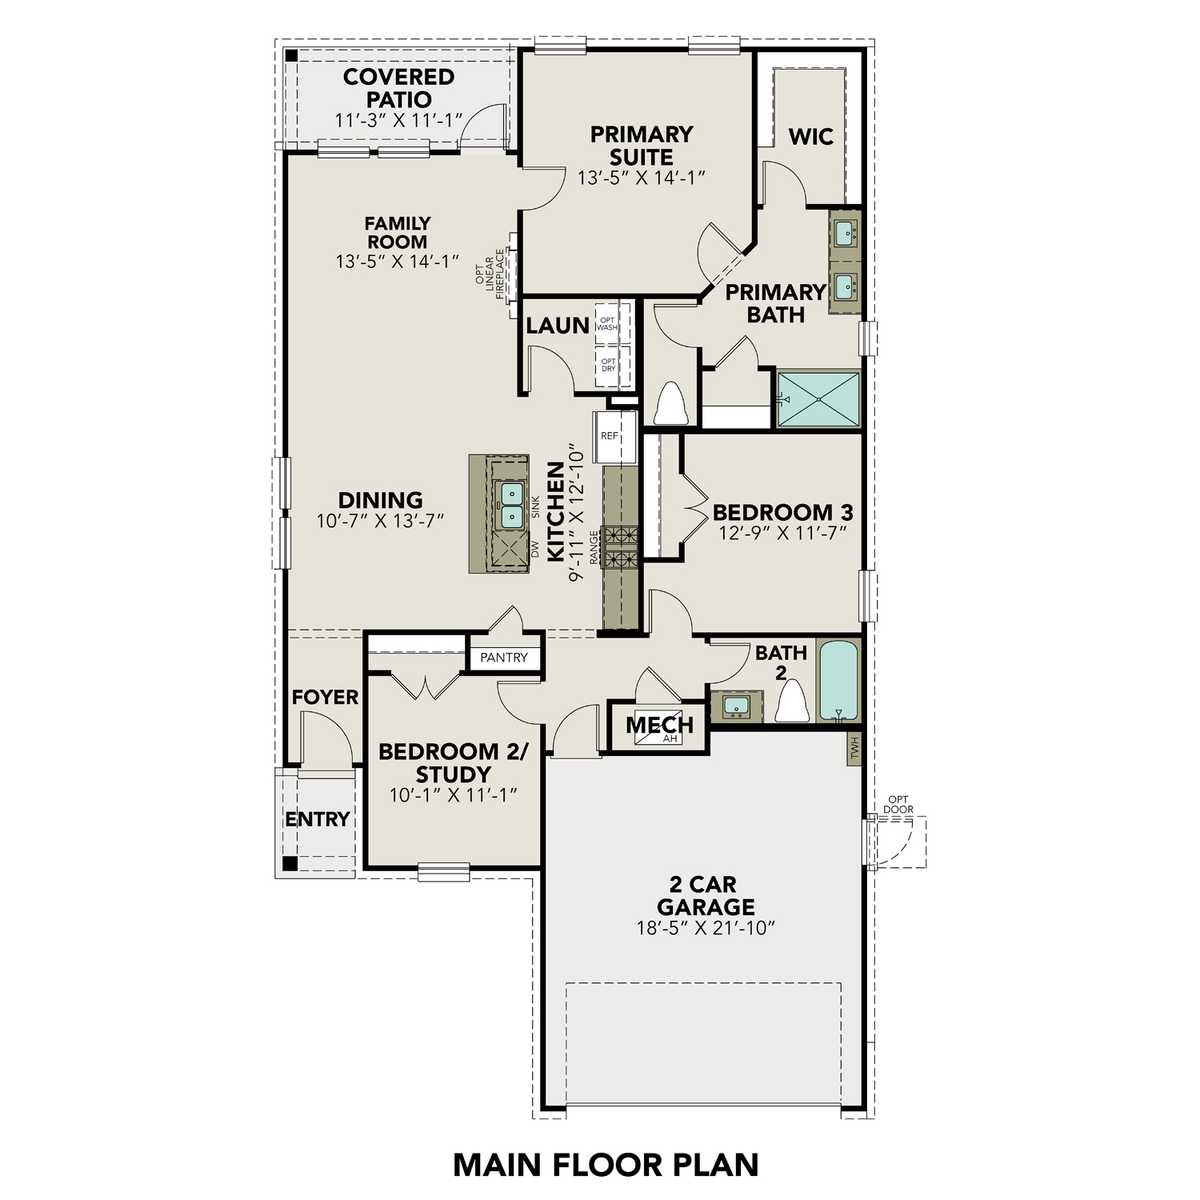 1 - The Costa A with 3-Car Garage floor plan layout for 55 Leon Way in Davidson Homes' River Ranch Meadows community.